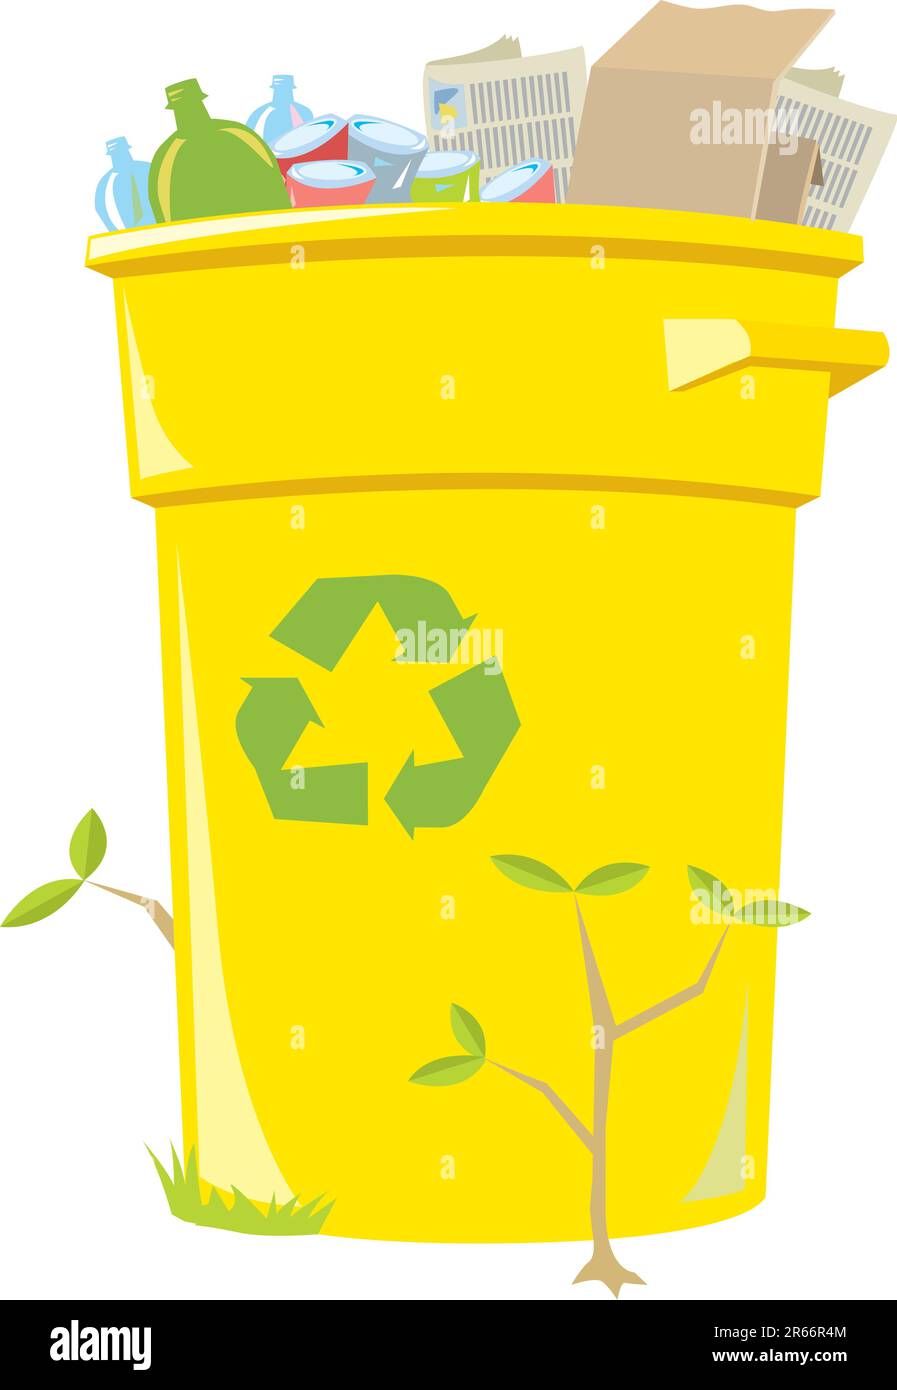 Filled curbside recycling bin with small plants growing around it. Stock Vector